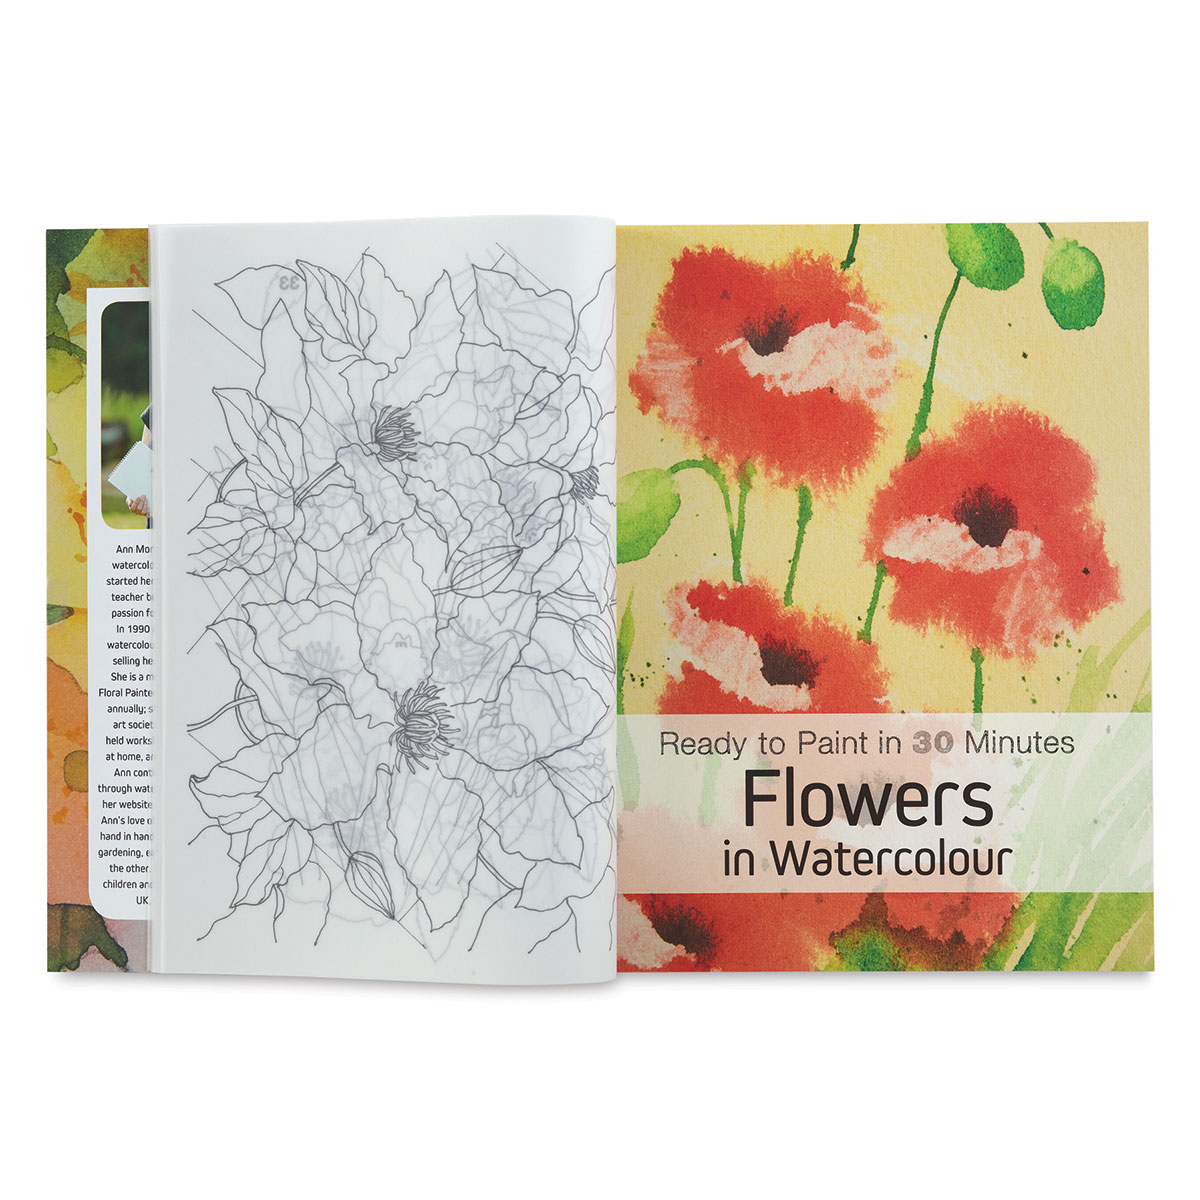 Ready to Paint in 30 Minutes: Flowers in Watercolour [Book]